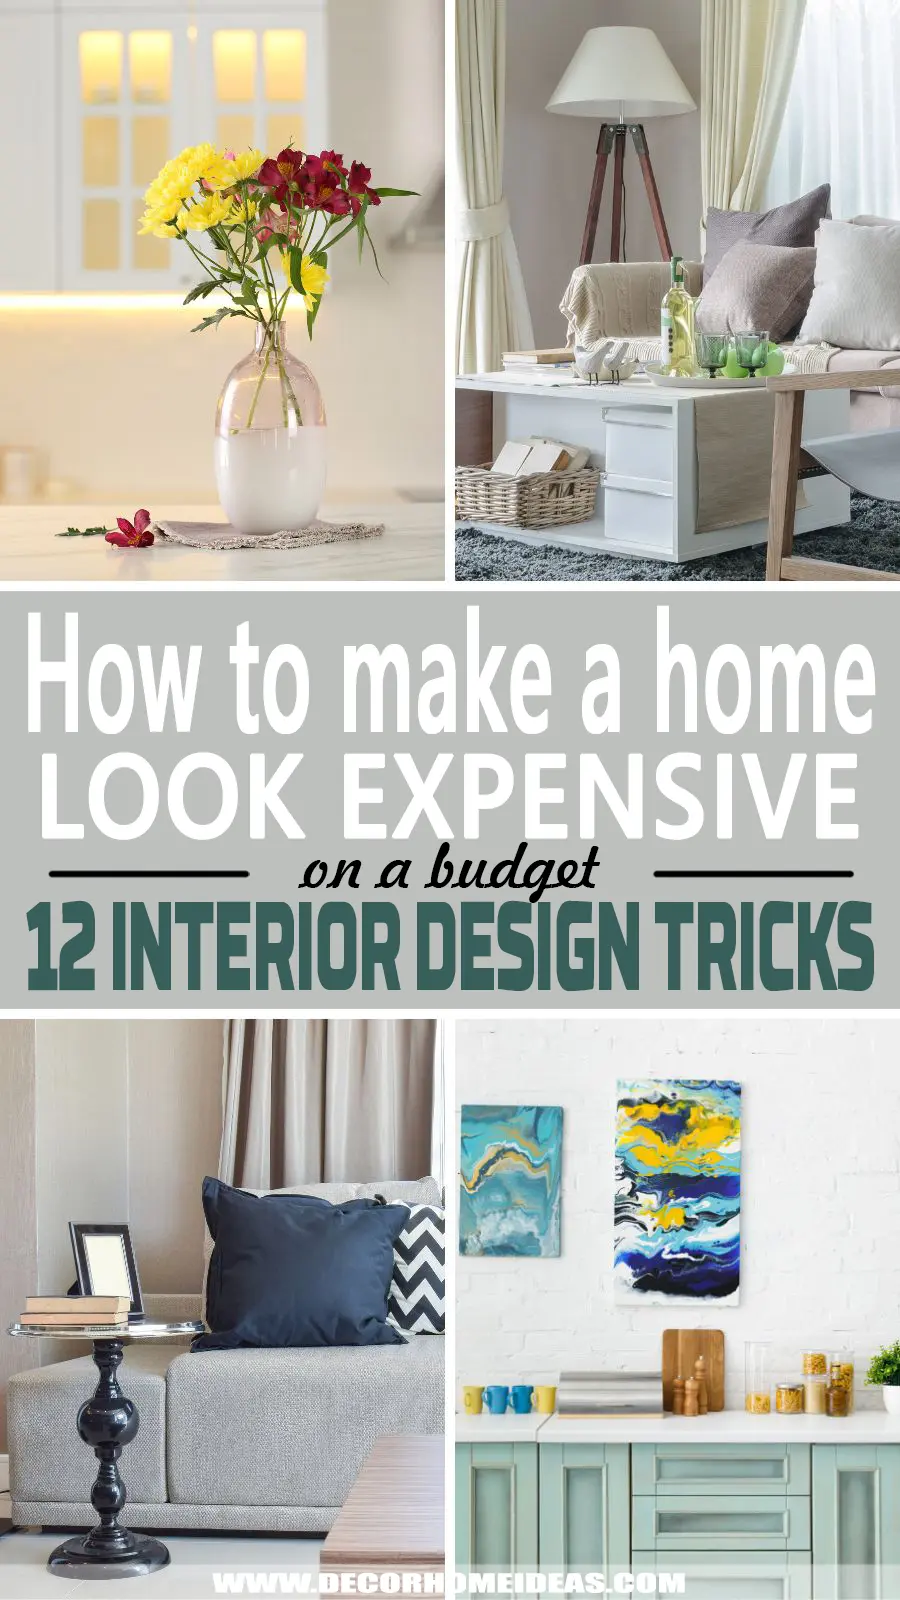 How To Make a Home Look Expensive On a Budget. Want to make your home look more expensive without breaking the bank? Check out our article where we share tips and tricks from rearranging furniture to adding window treatments.